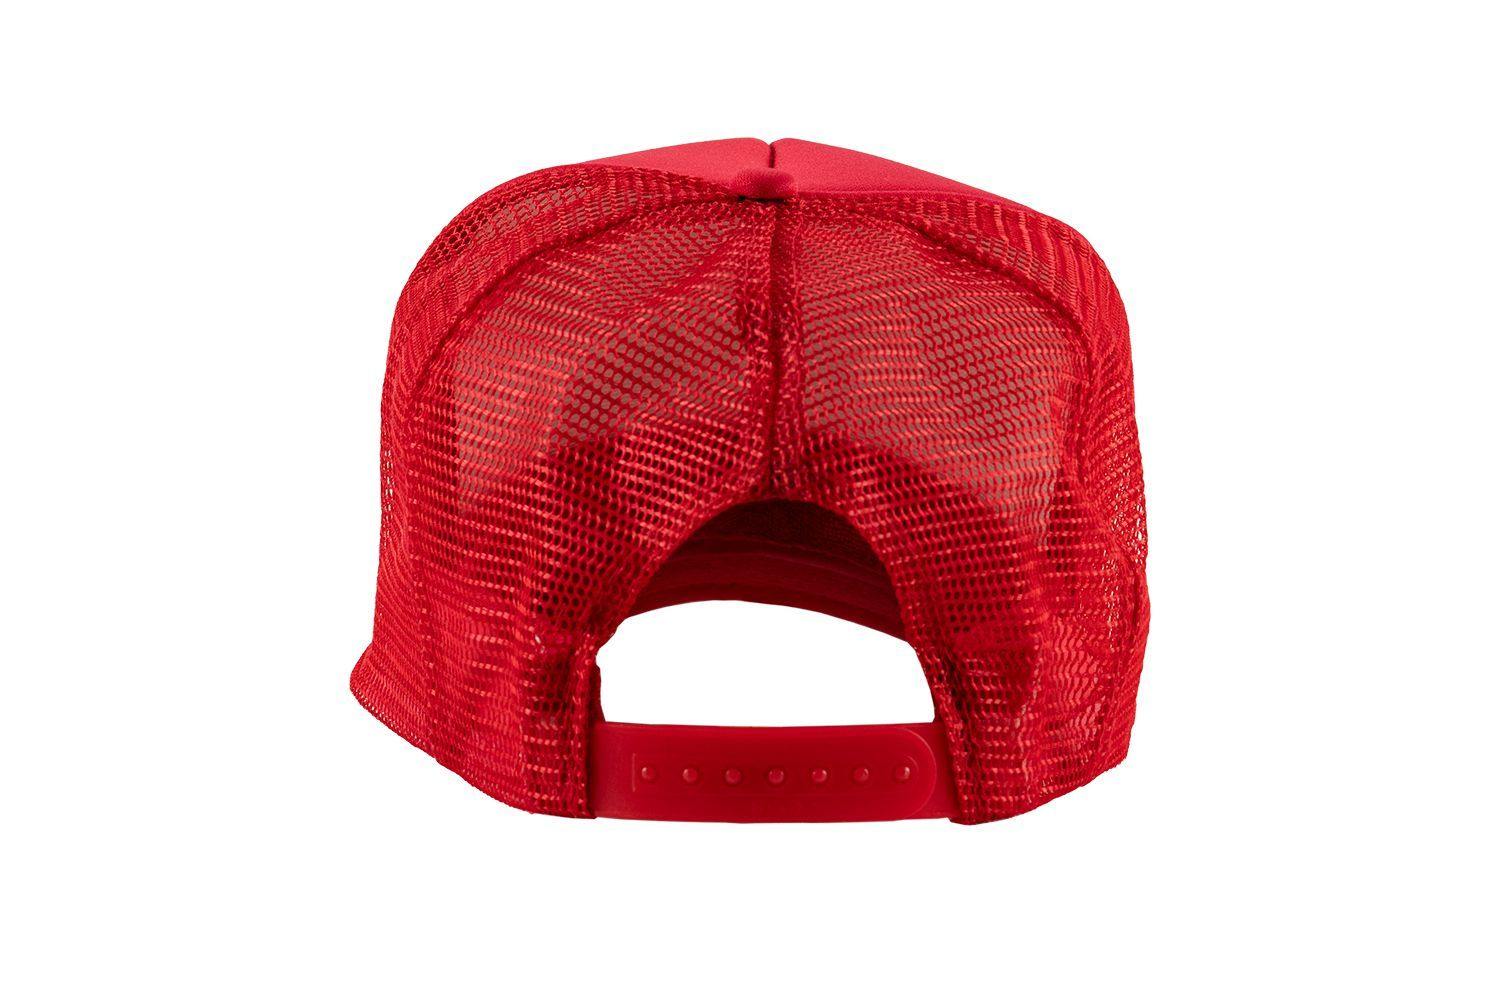 Local (Parrot Red) high crown trucker cap with mesh back and snapback - Tropic Trucker Australia®